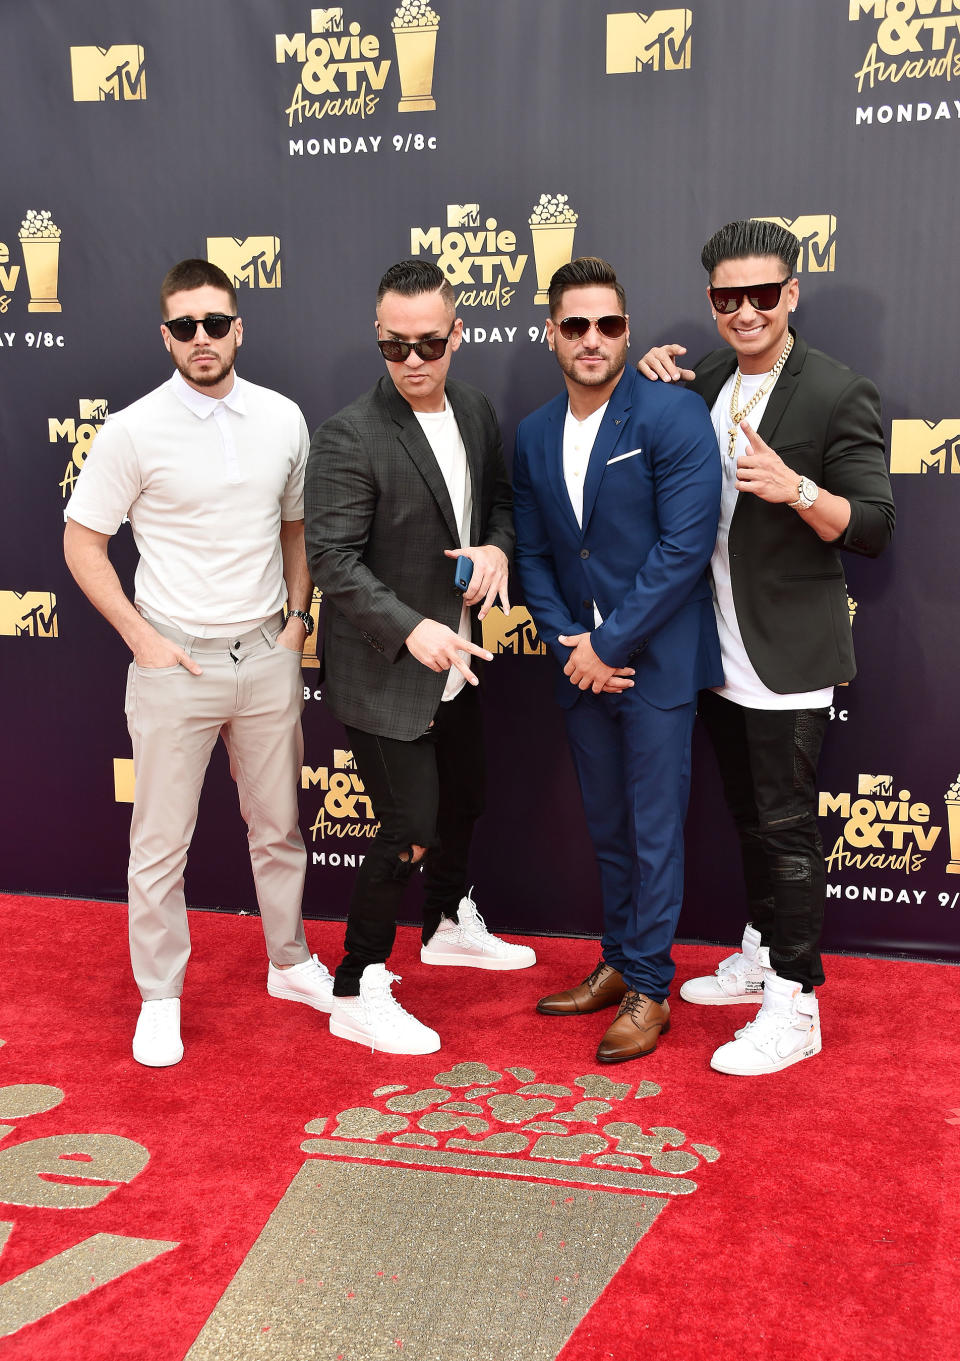 Jersey Shore: Family Reunion 's Vinny Guadagnino, Mike 'The Situation' Sorrentino, Ronnie Ortiz-Magro, and Pauly D